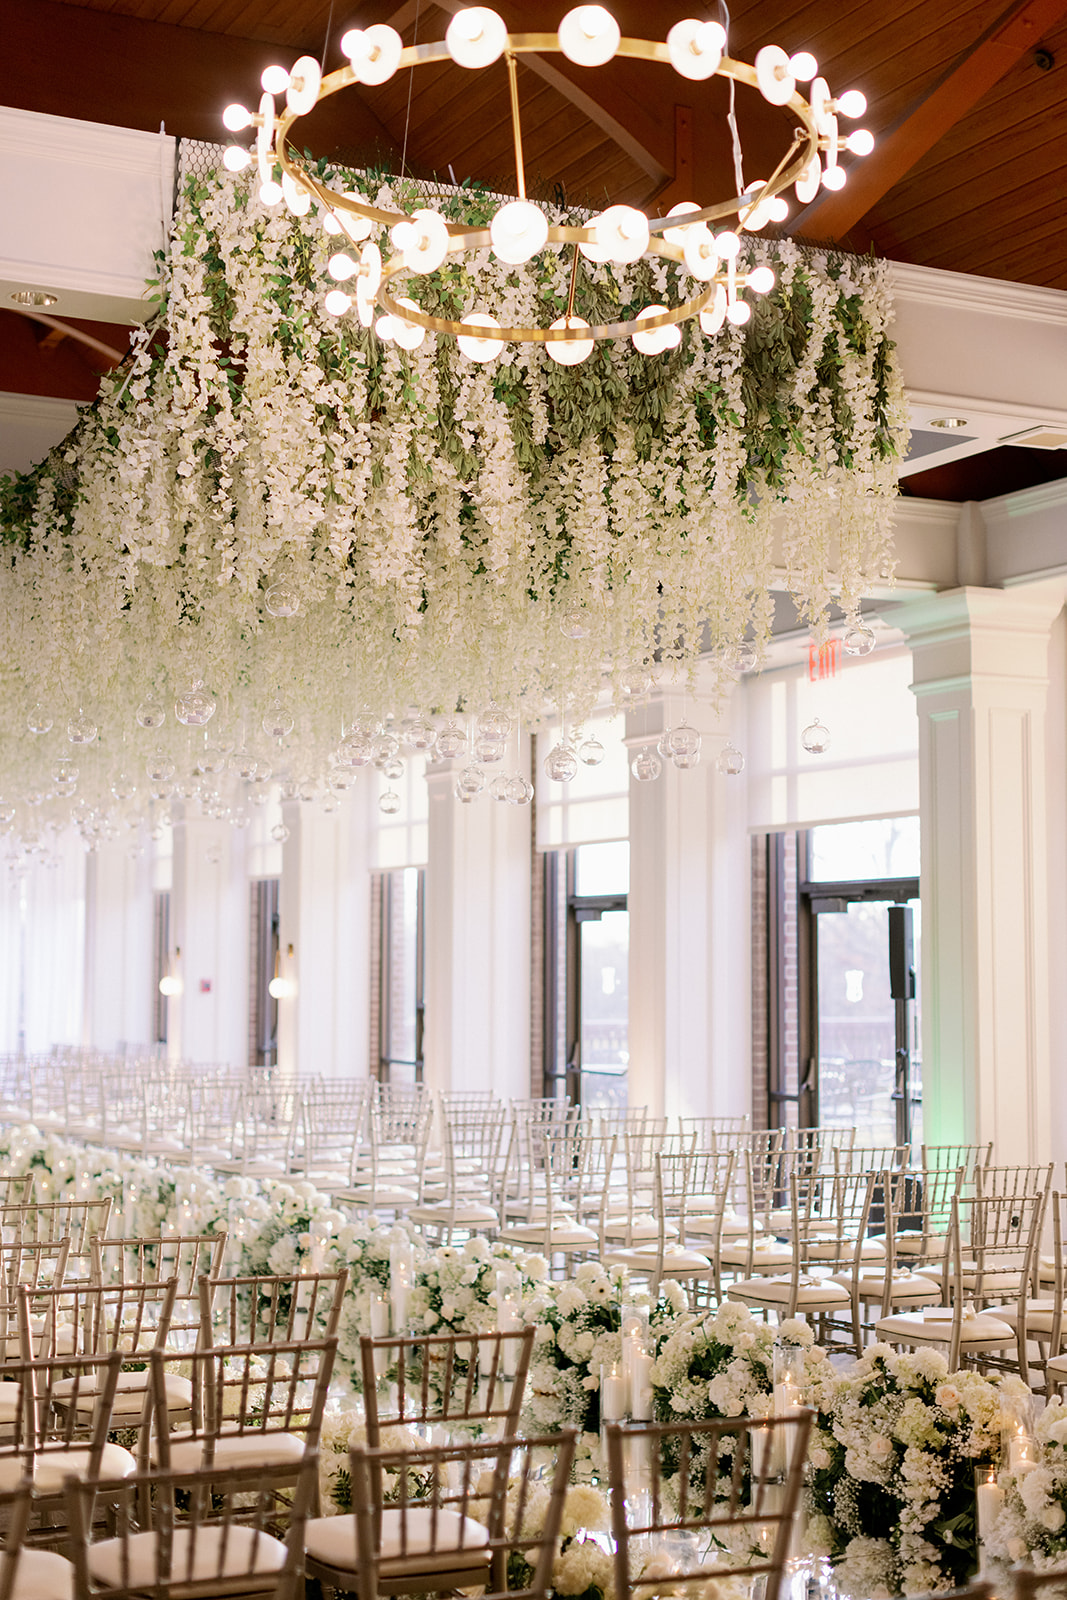 Indoor floral wedding ceremony with hanging installations and chiavari chair at Pine Hollow Country Club.